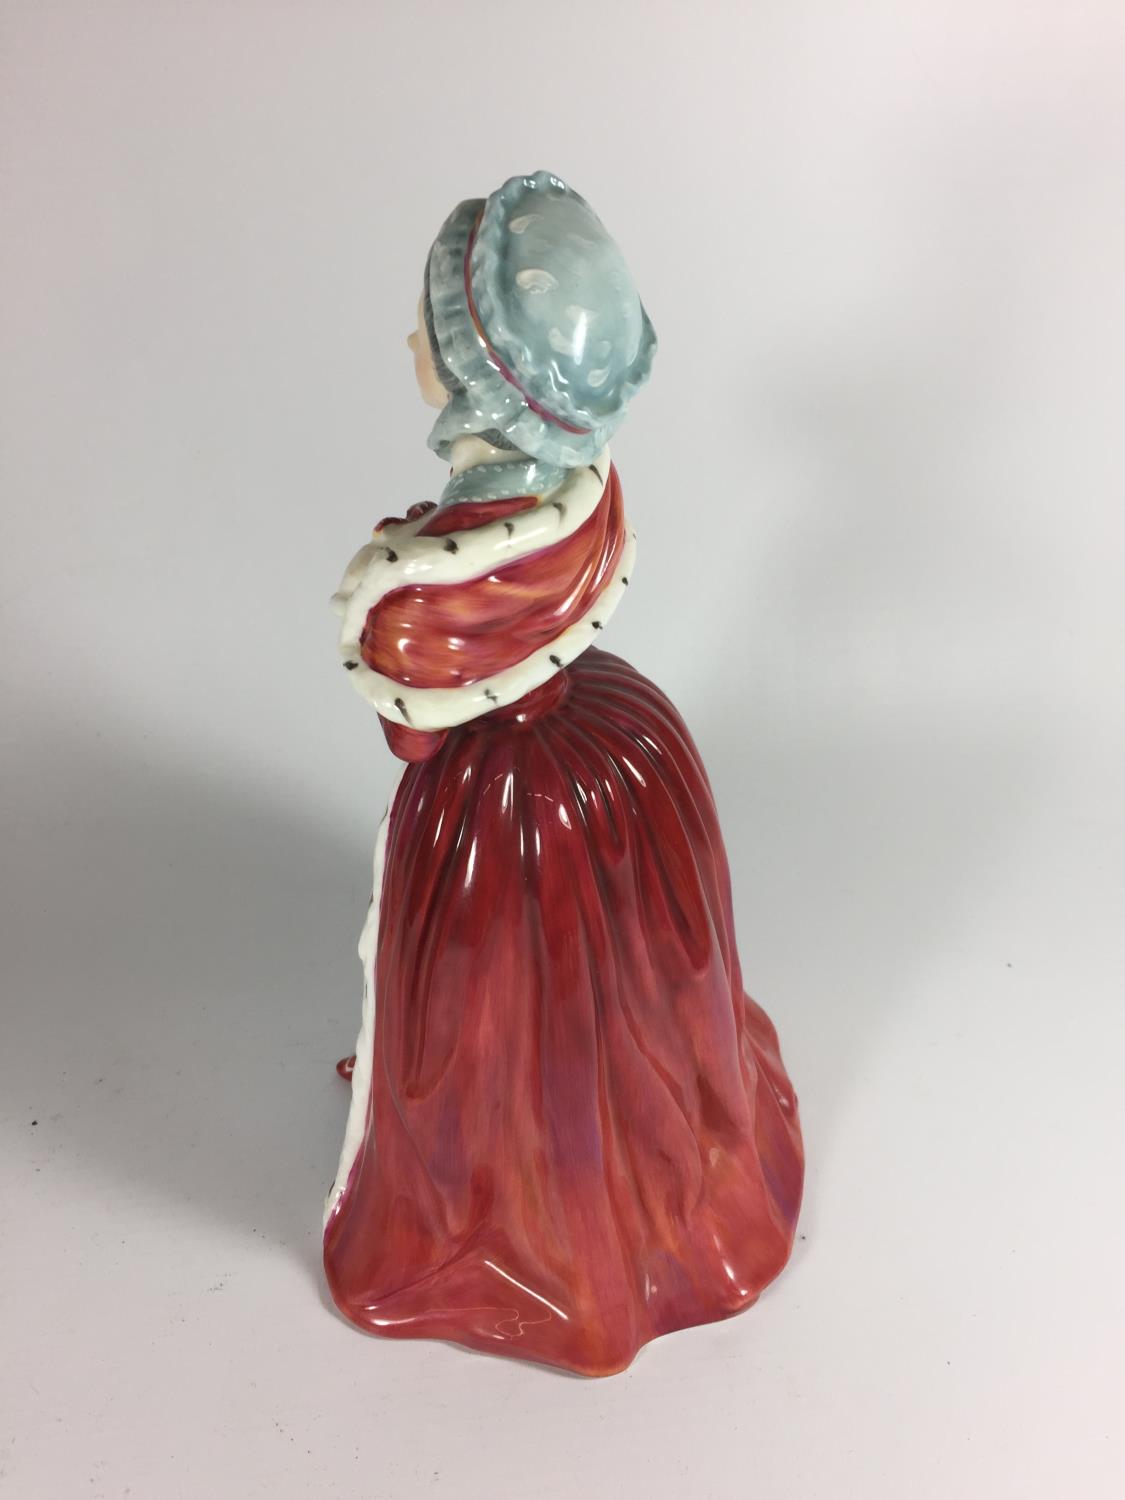 A ROYAL DOULTON 'COUNTESS SPENCER' HN3320 LIMITED EDITION FIGURE - Image 2 of 3